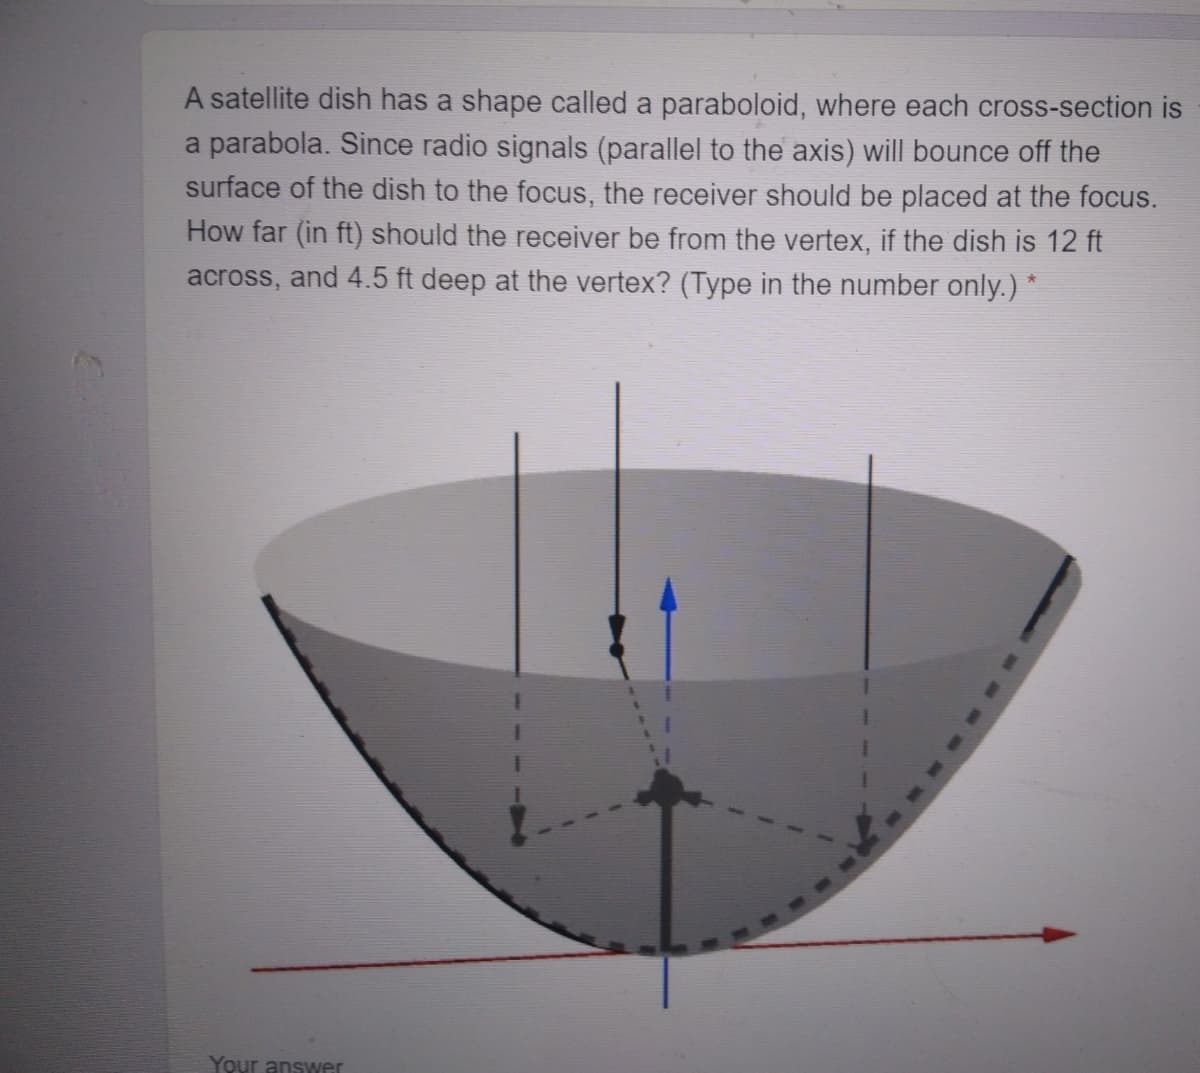 A satellite dish has a shape called a paraboloid, where each cross-section is
a parabola. Since radio signals (parallel to the axis) will bounce off the
surface of the dish to the focus, the receiver should be placed at the focus.
How far (in ft) should the receiver be from the vertex, if the dish is 12 ft
and 4.5 ft deep at the vertex? (Type in the number only.) *
across,
Your answer
